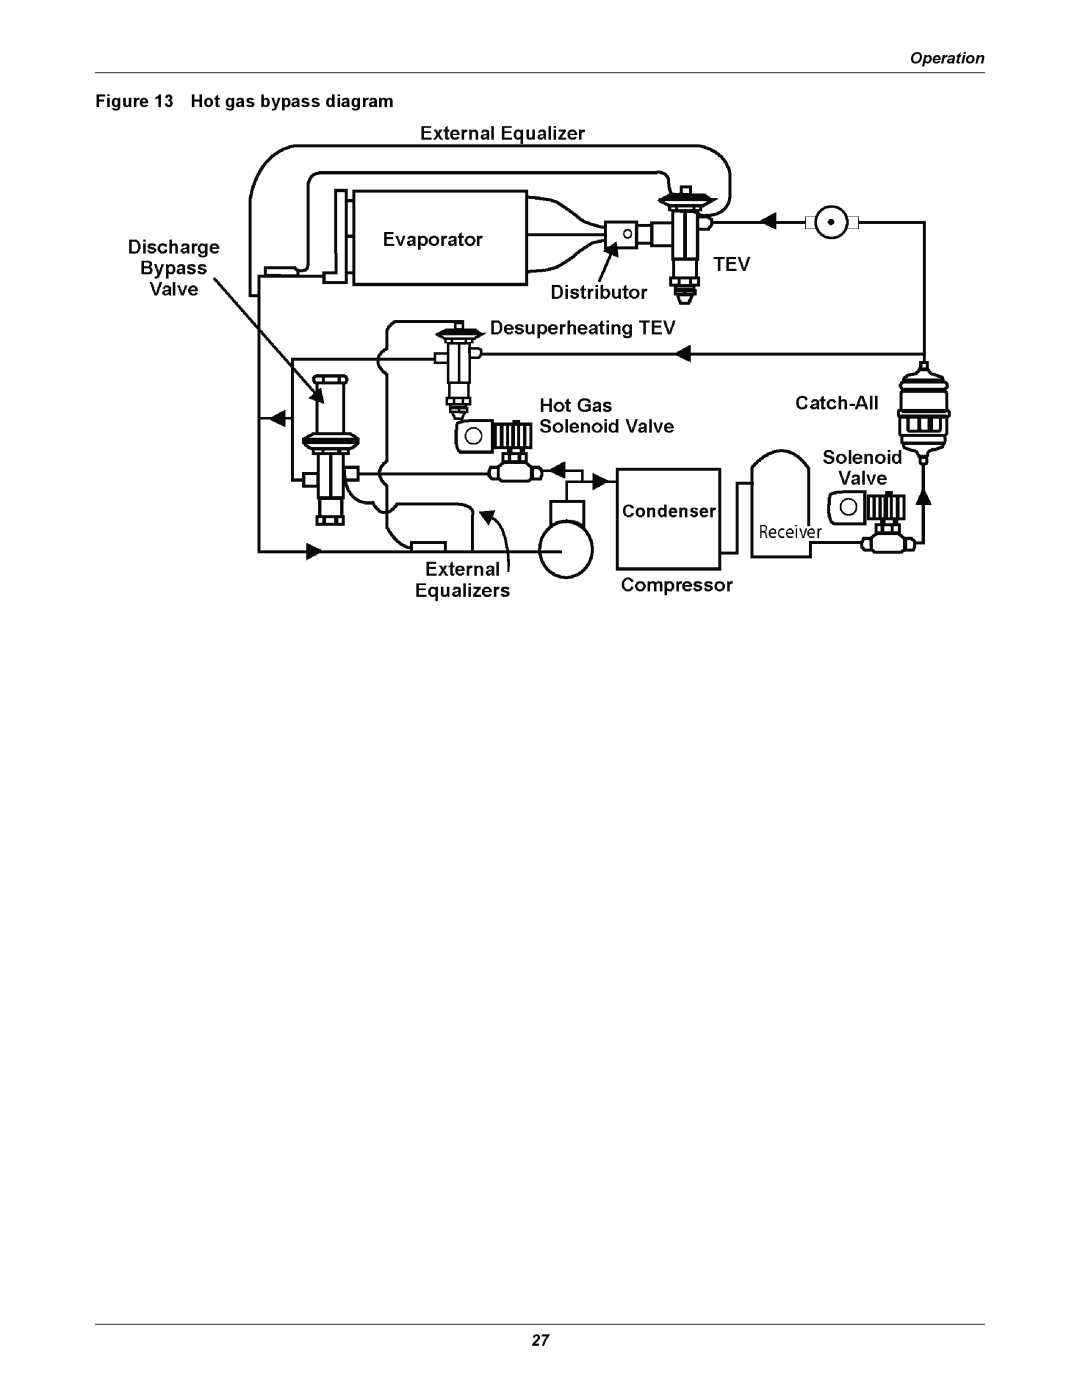 Emerson Figure i manual Hot gas bypass diagram, Operation 